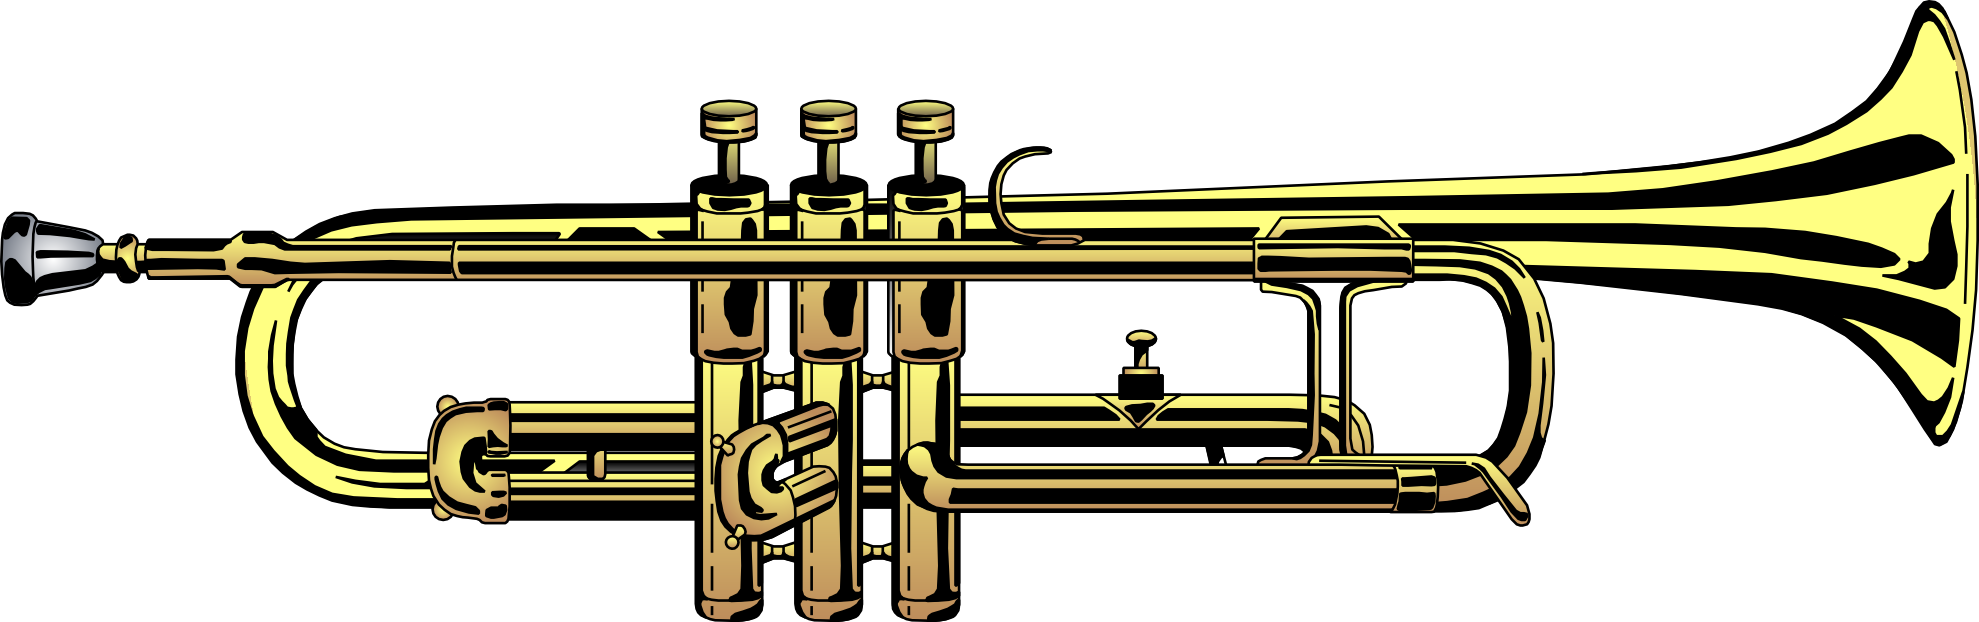 Clip Art Trumpet Images & Pictures - Becuo